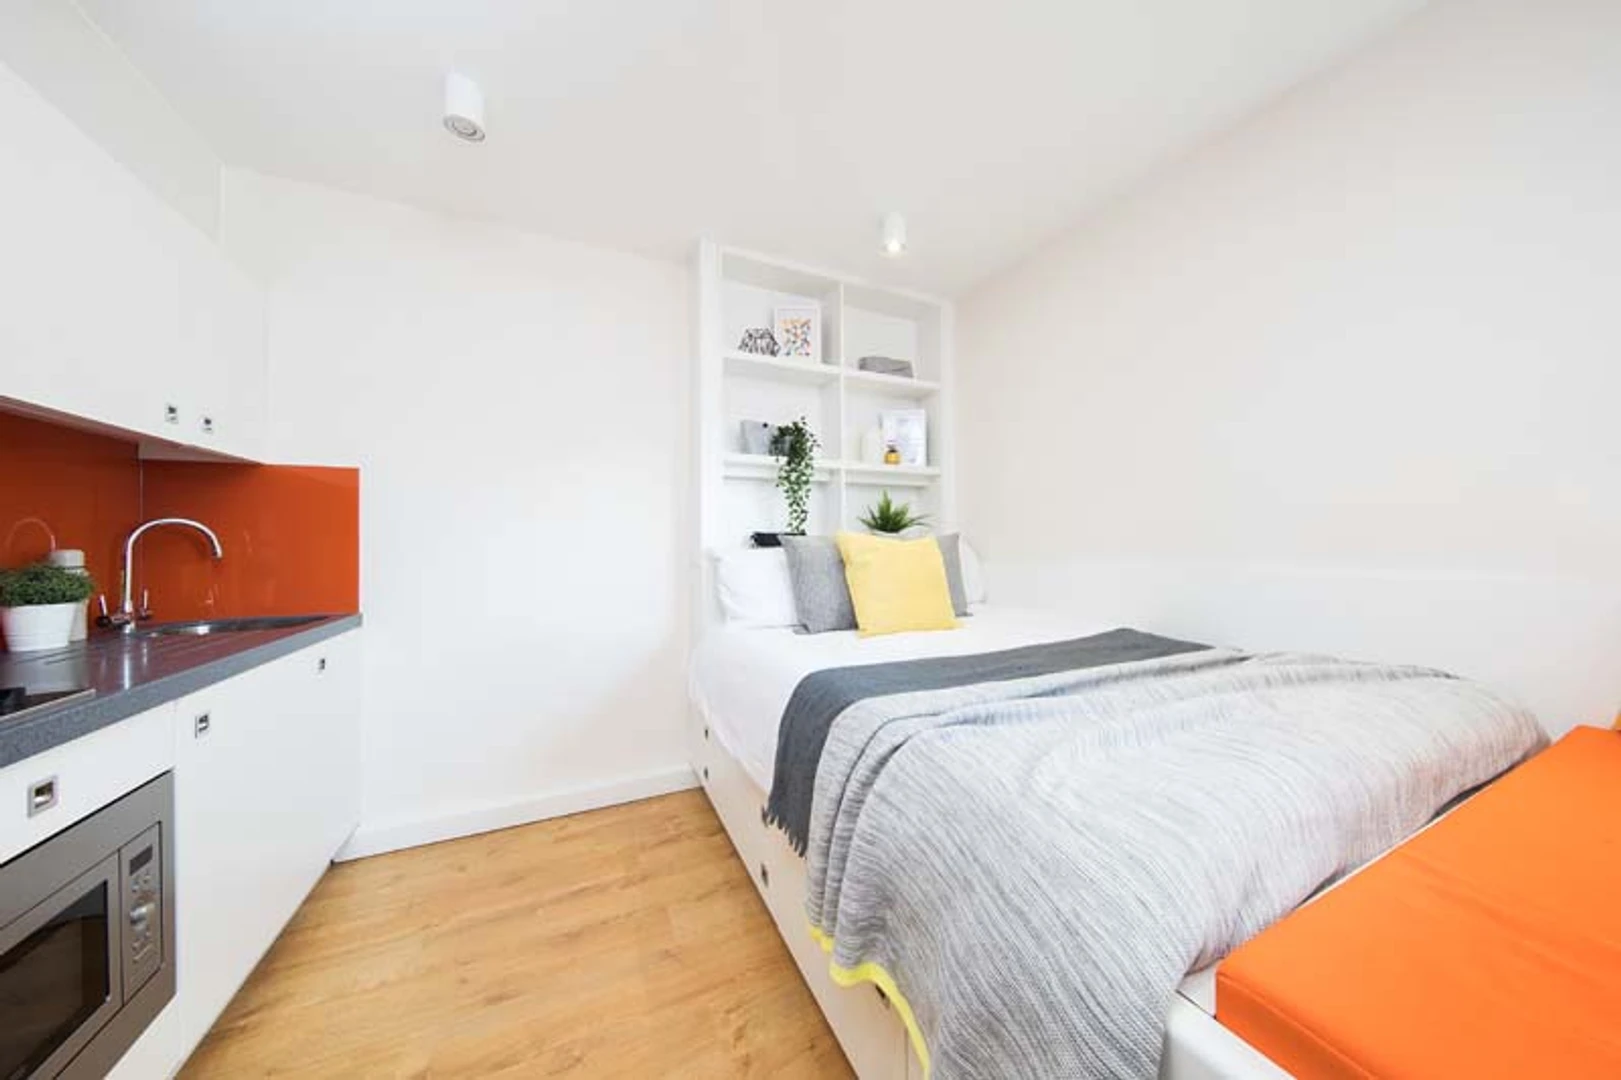 Renting rooms by the month in Cardiff